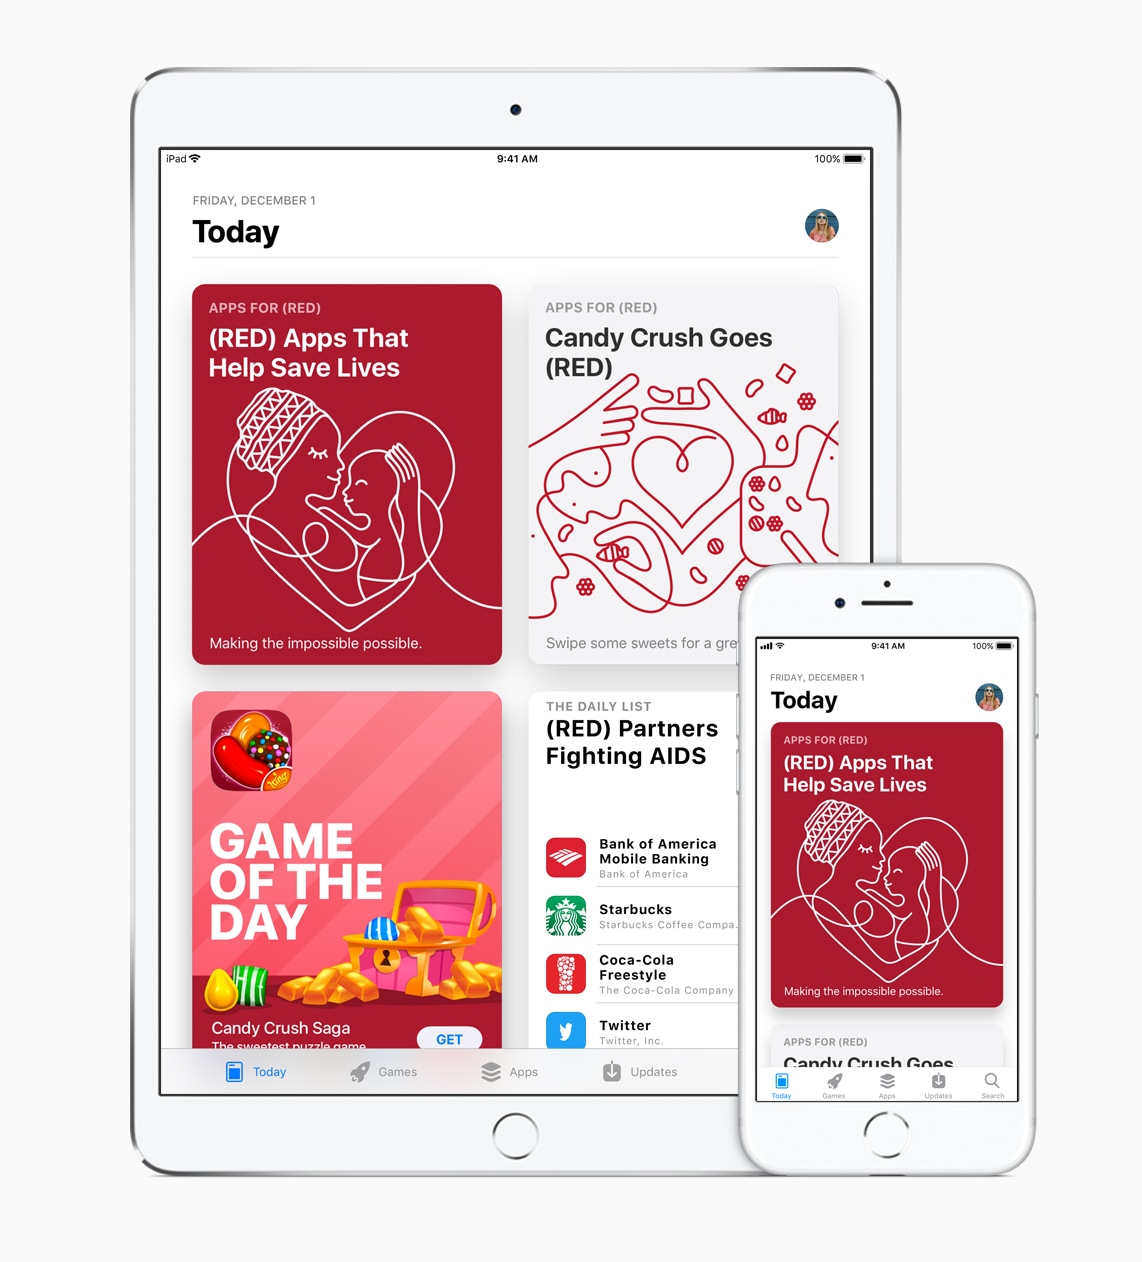 Partnership between Apple and (RED)